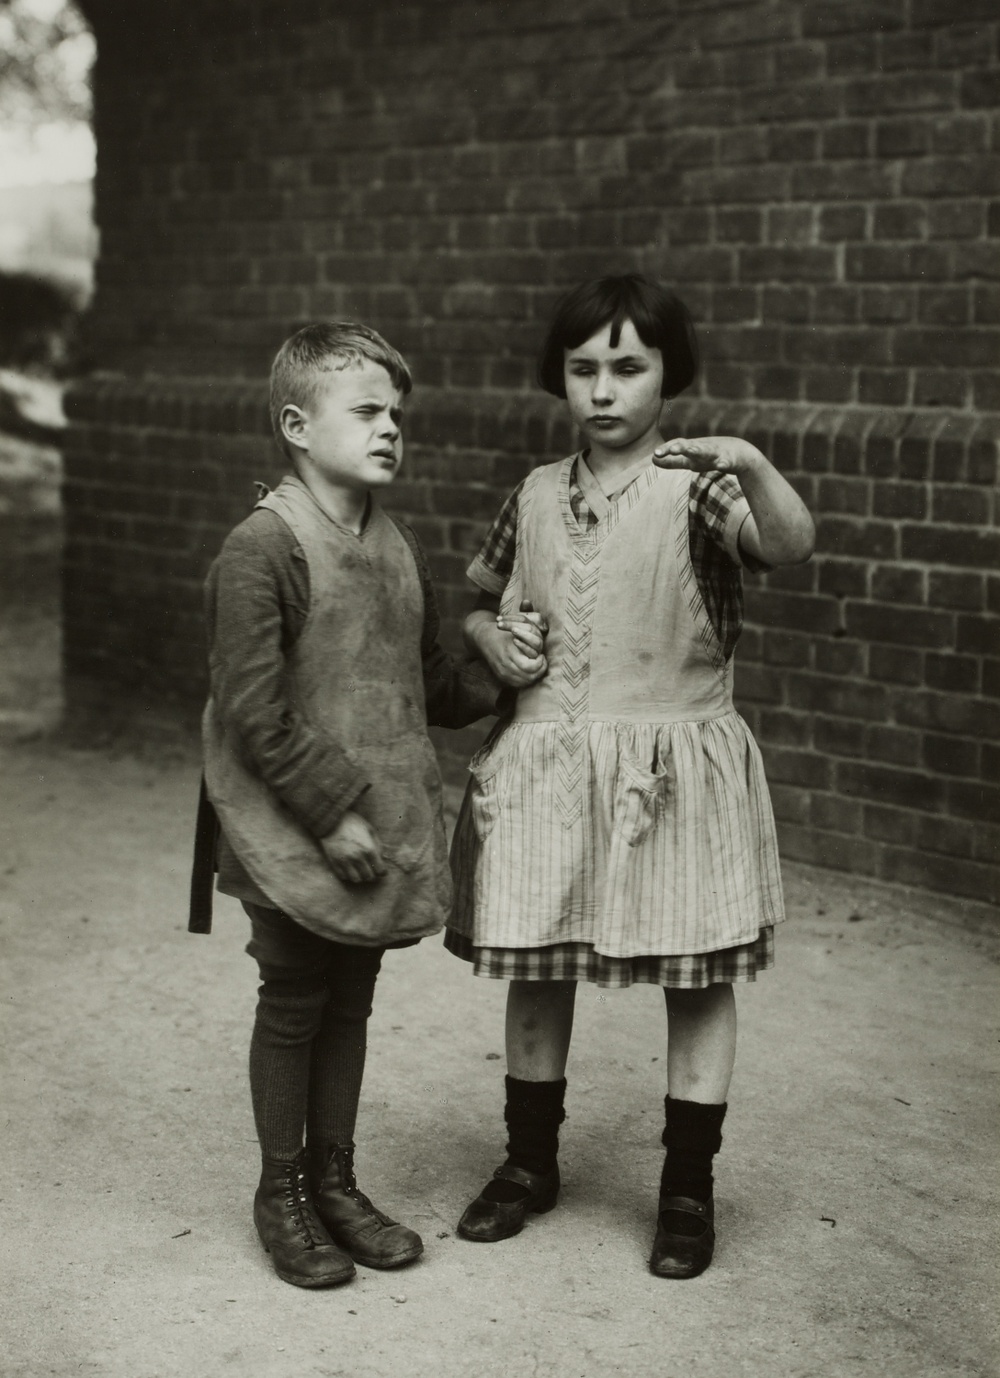 A black and white photograph of a young boy and girl standing in the street holding hands and wearing dirty clothing. The girl’s hand is suspended in front of her body at shoulder height.